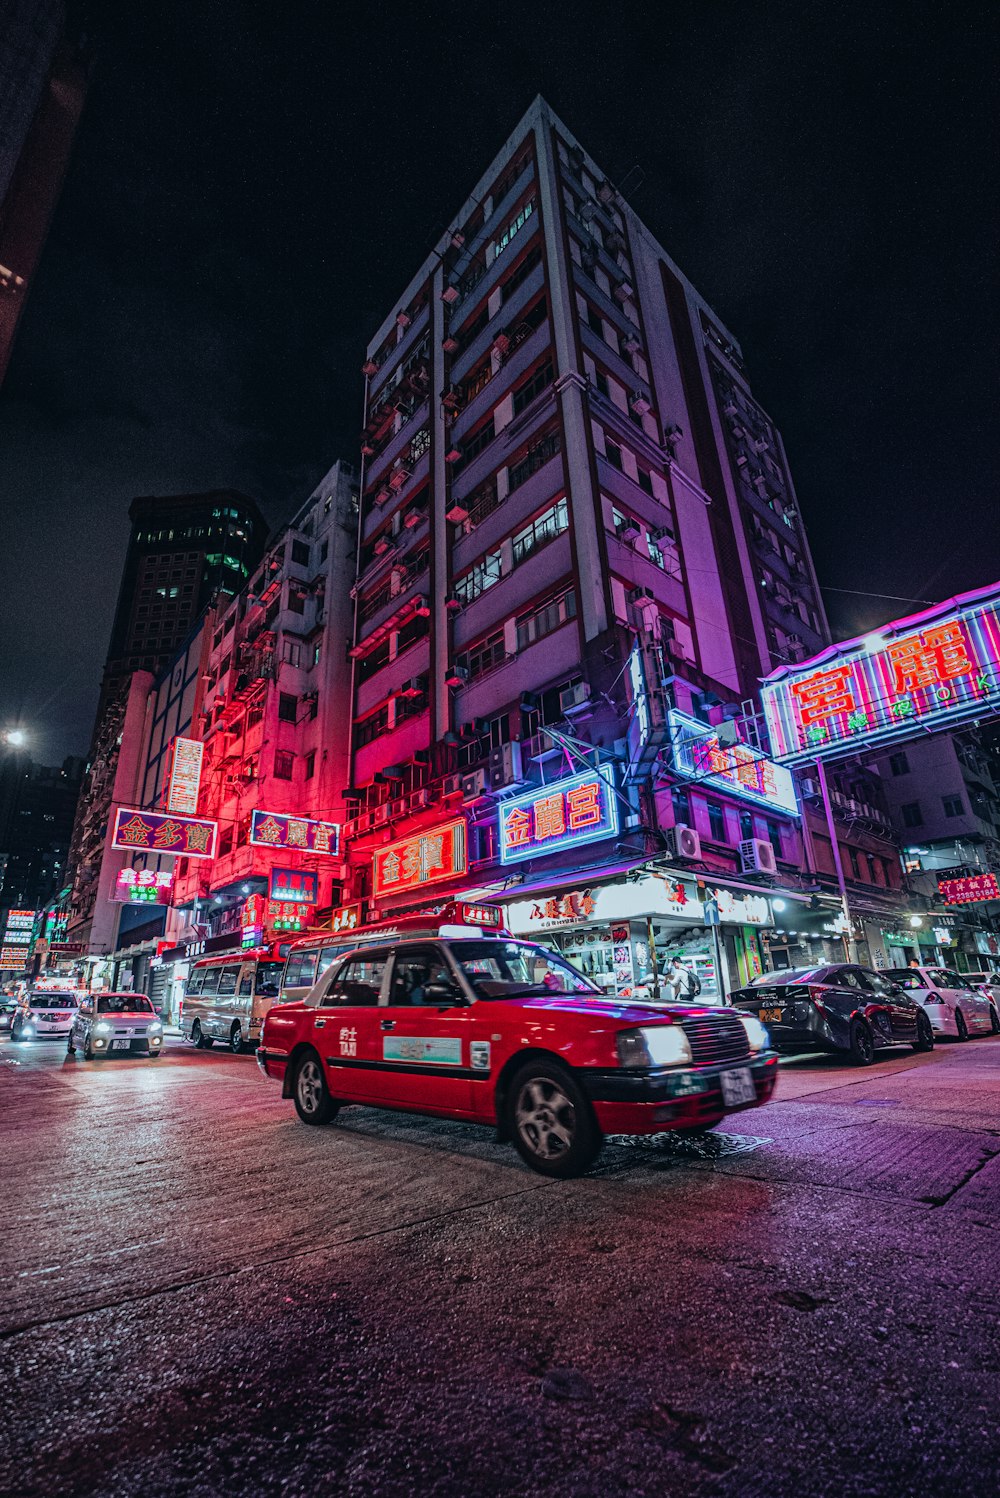 a red taxi cab driving down a street next to tall buildings